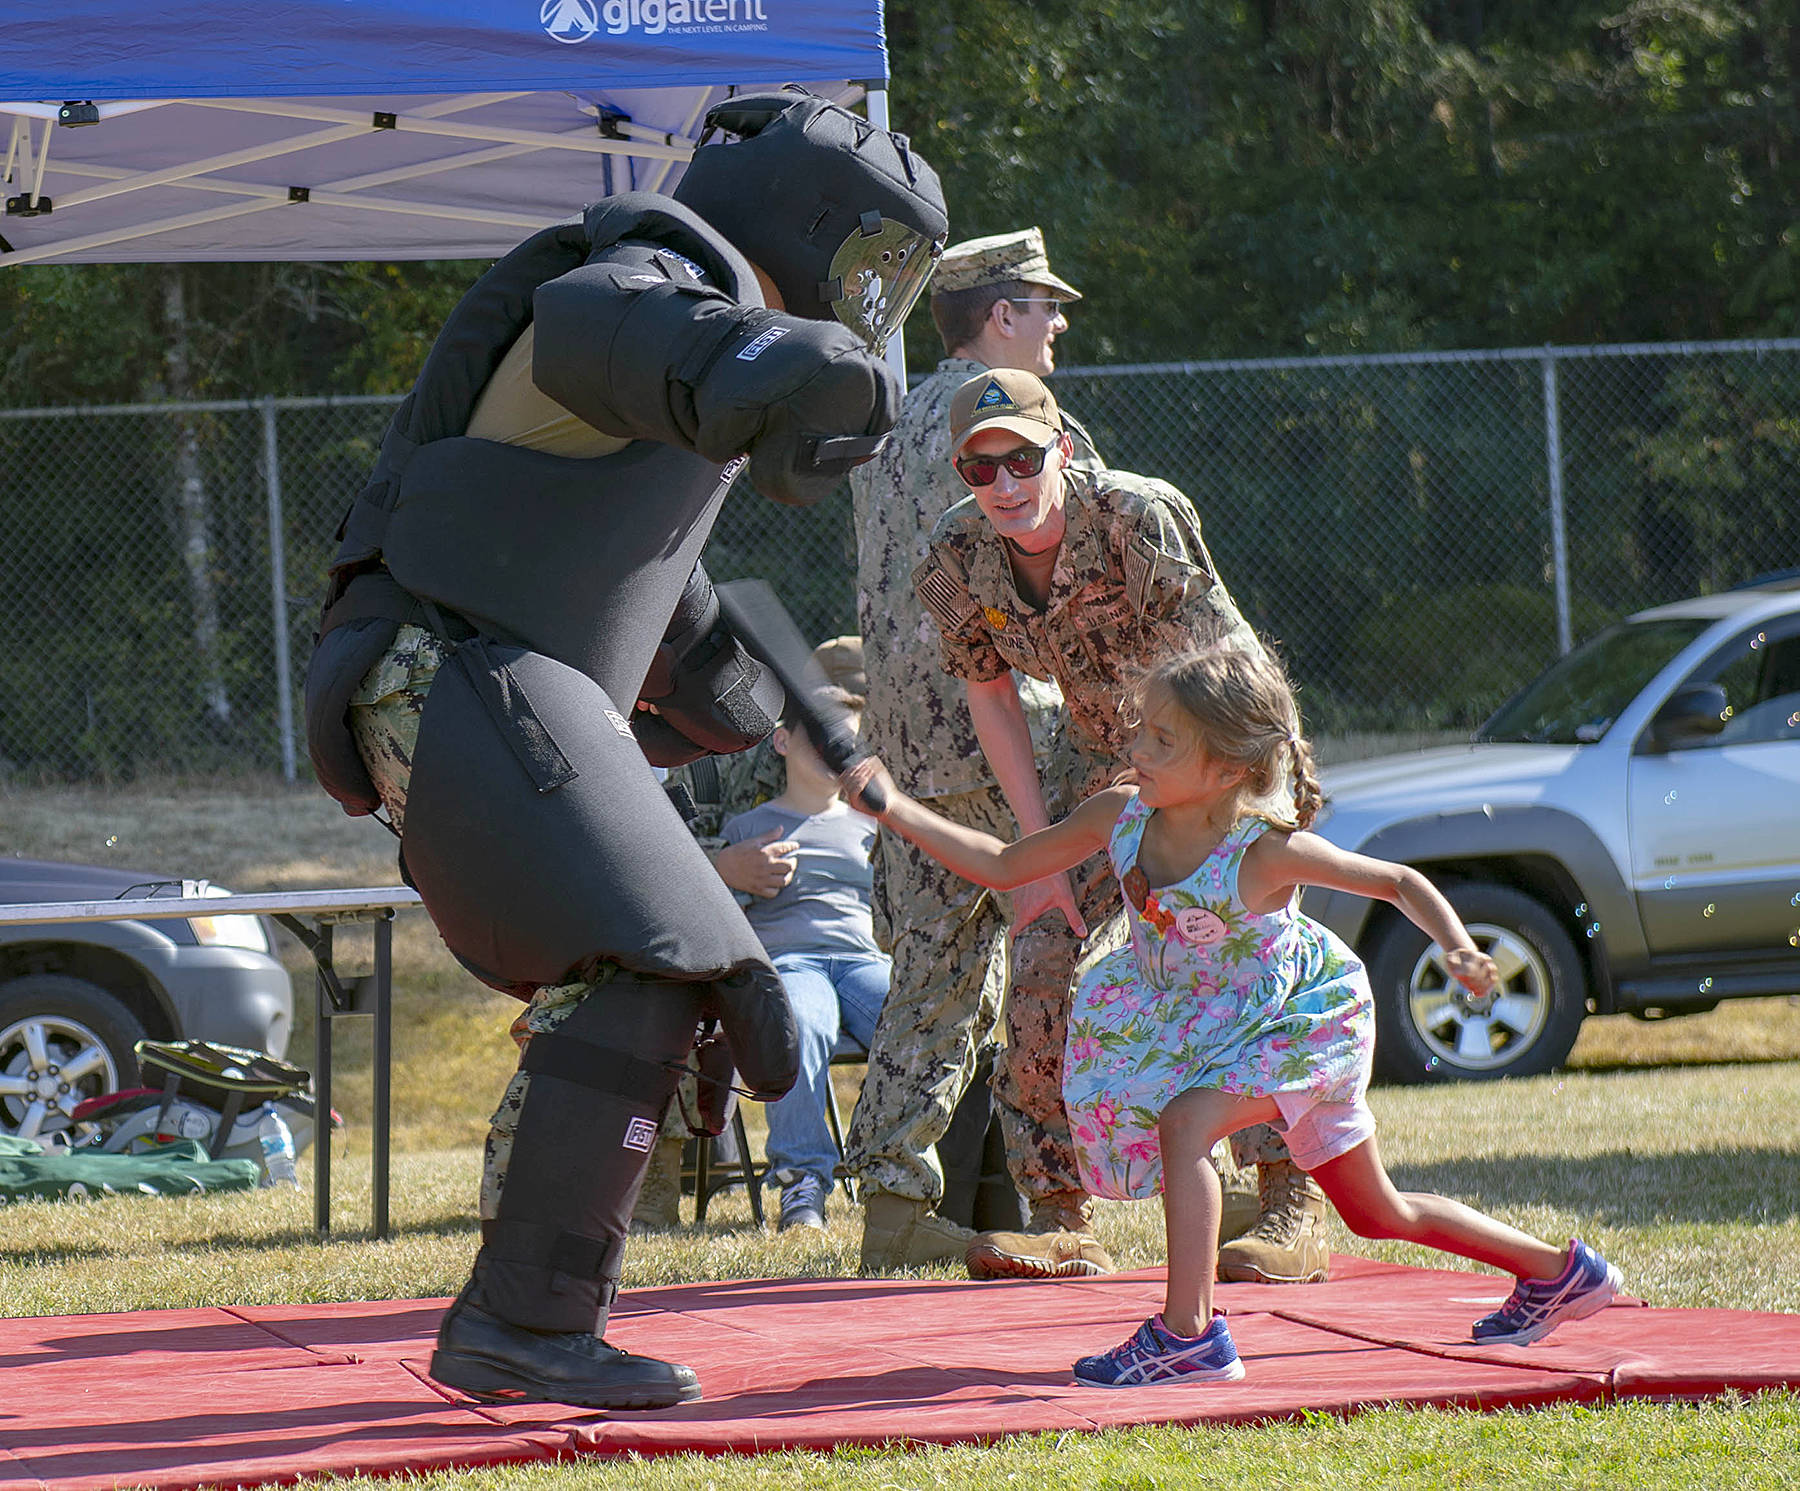 File photo
Master-at-Arms 1st Class Nick Fortune gives instruction during a take down demonstration to visitors in attendance of National Night Out on Fort Nugent Park in 2019. National Night Out is an annual community-building campaign that promotes police-community partnerships and neighborhood camaraderie and is coming back this year on Aug. 3. (U.S. Navy photo by Mass Communication Specialist 2nd Class Marc Cuenca/Released)